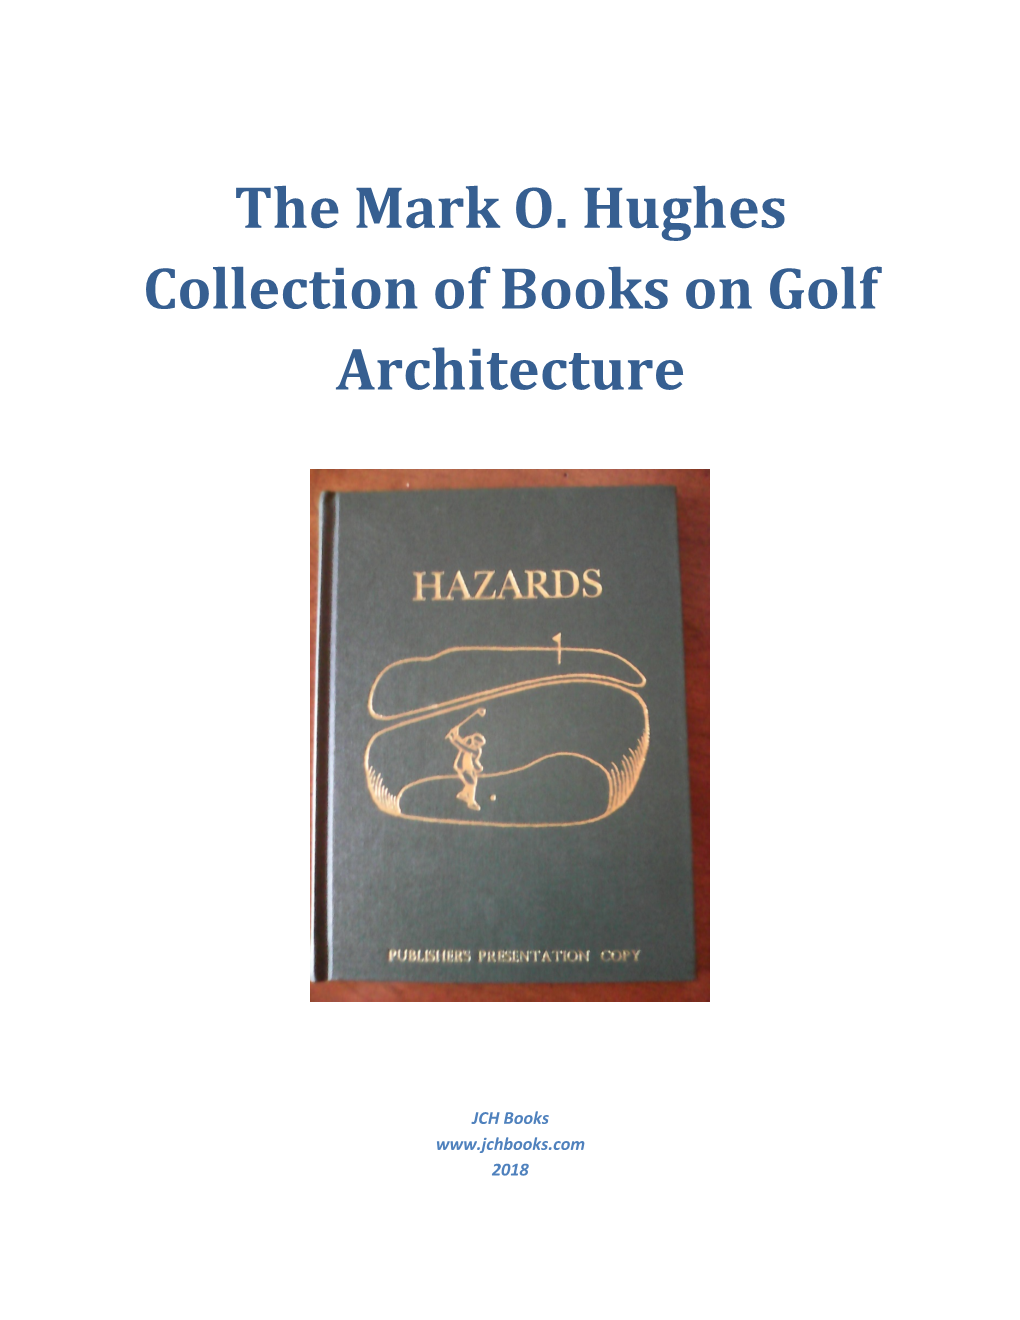 The Mark O. Hughes Collection of Books on Golf Architecture